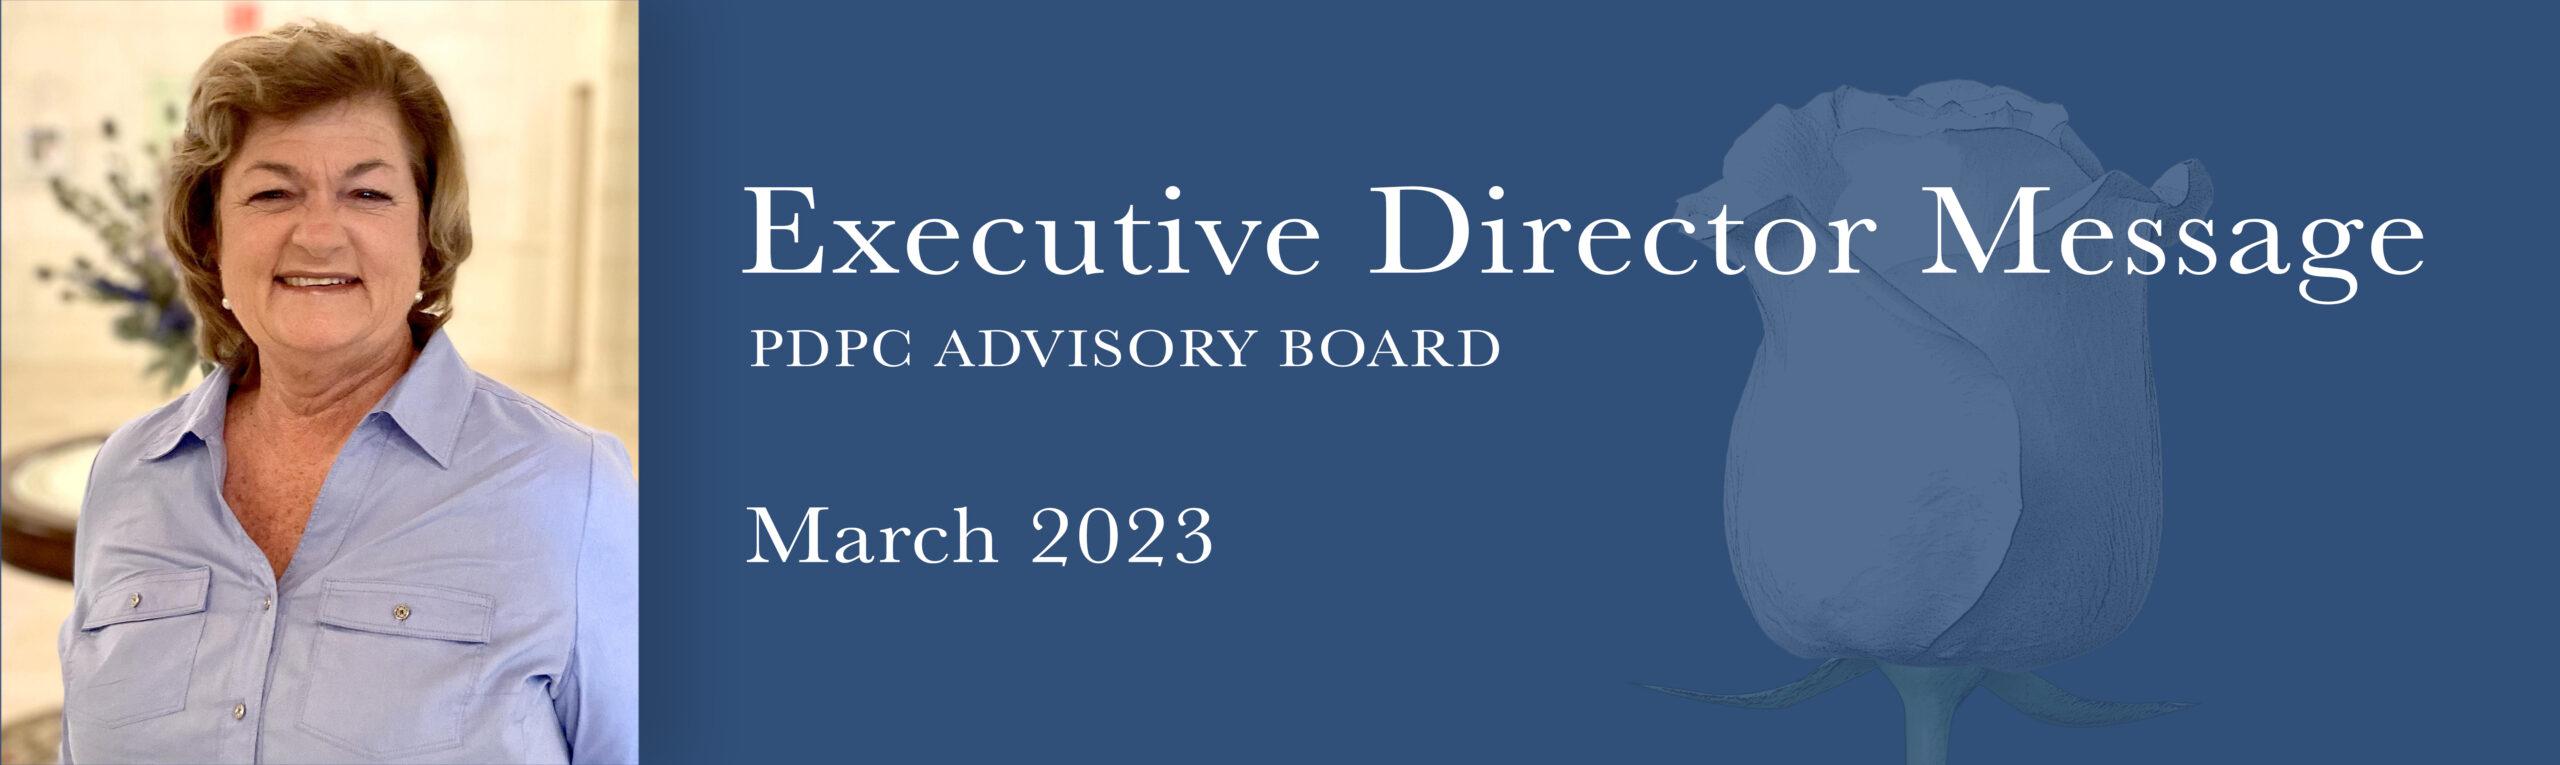 PDPC Executive Director's Message